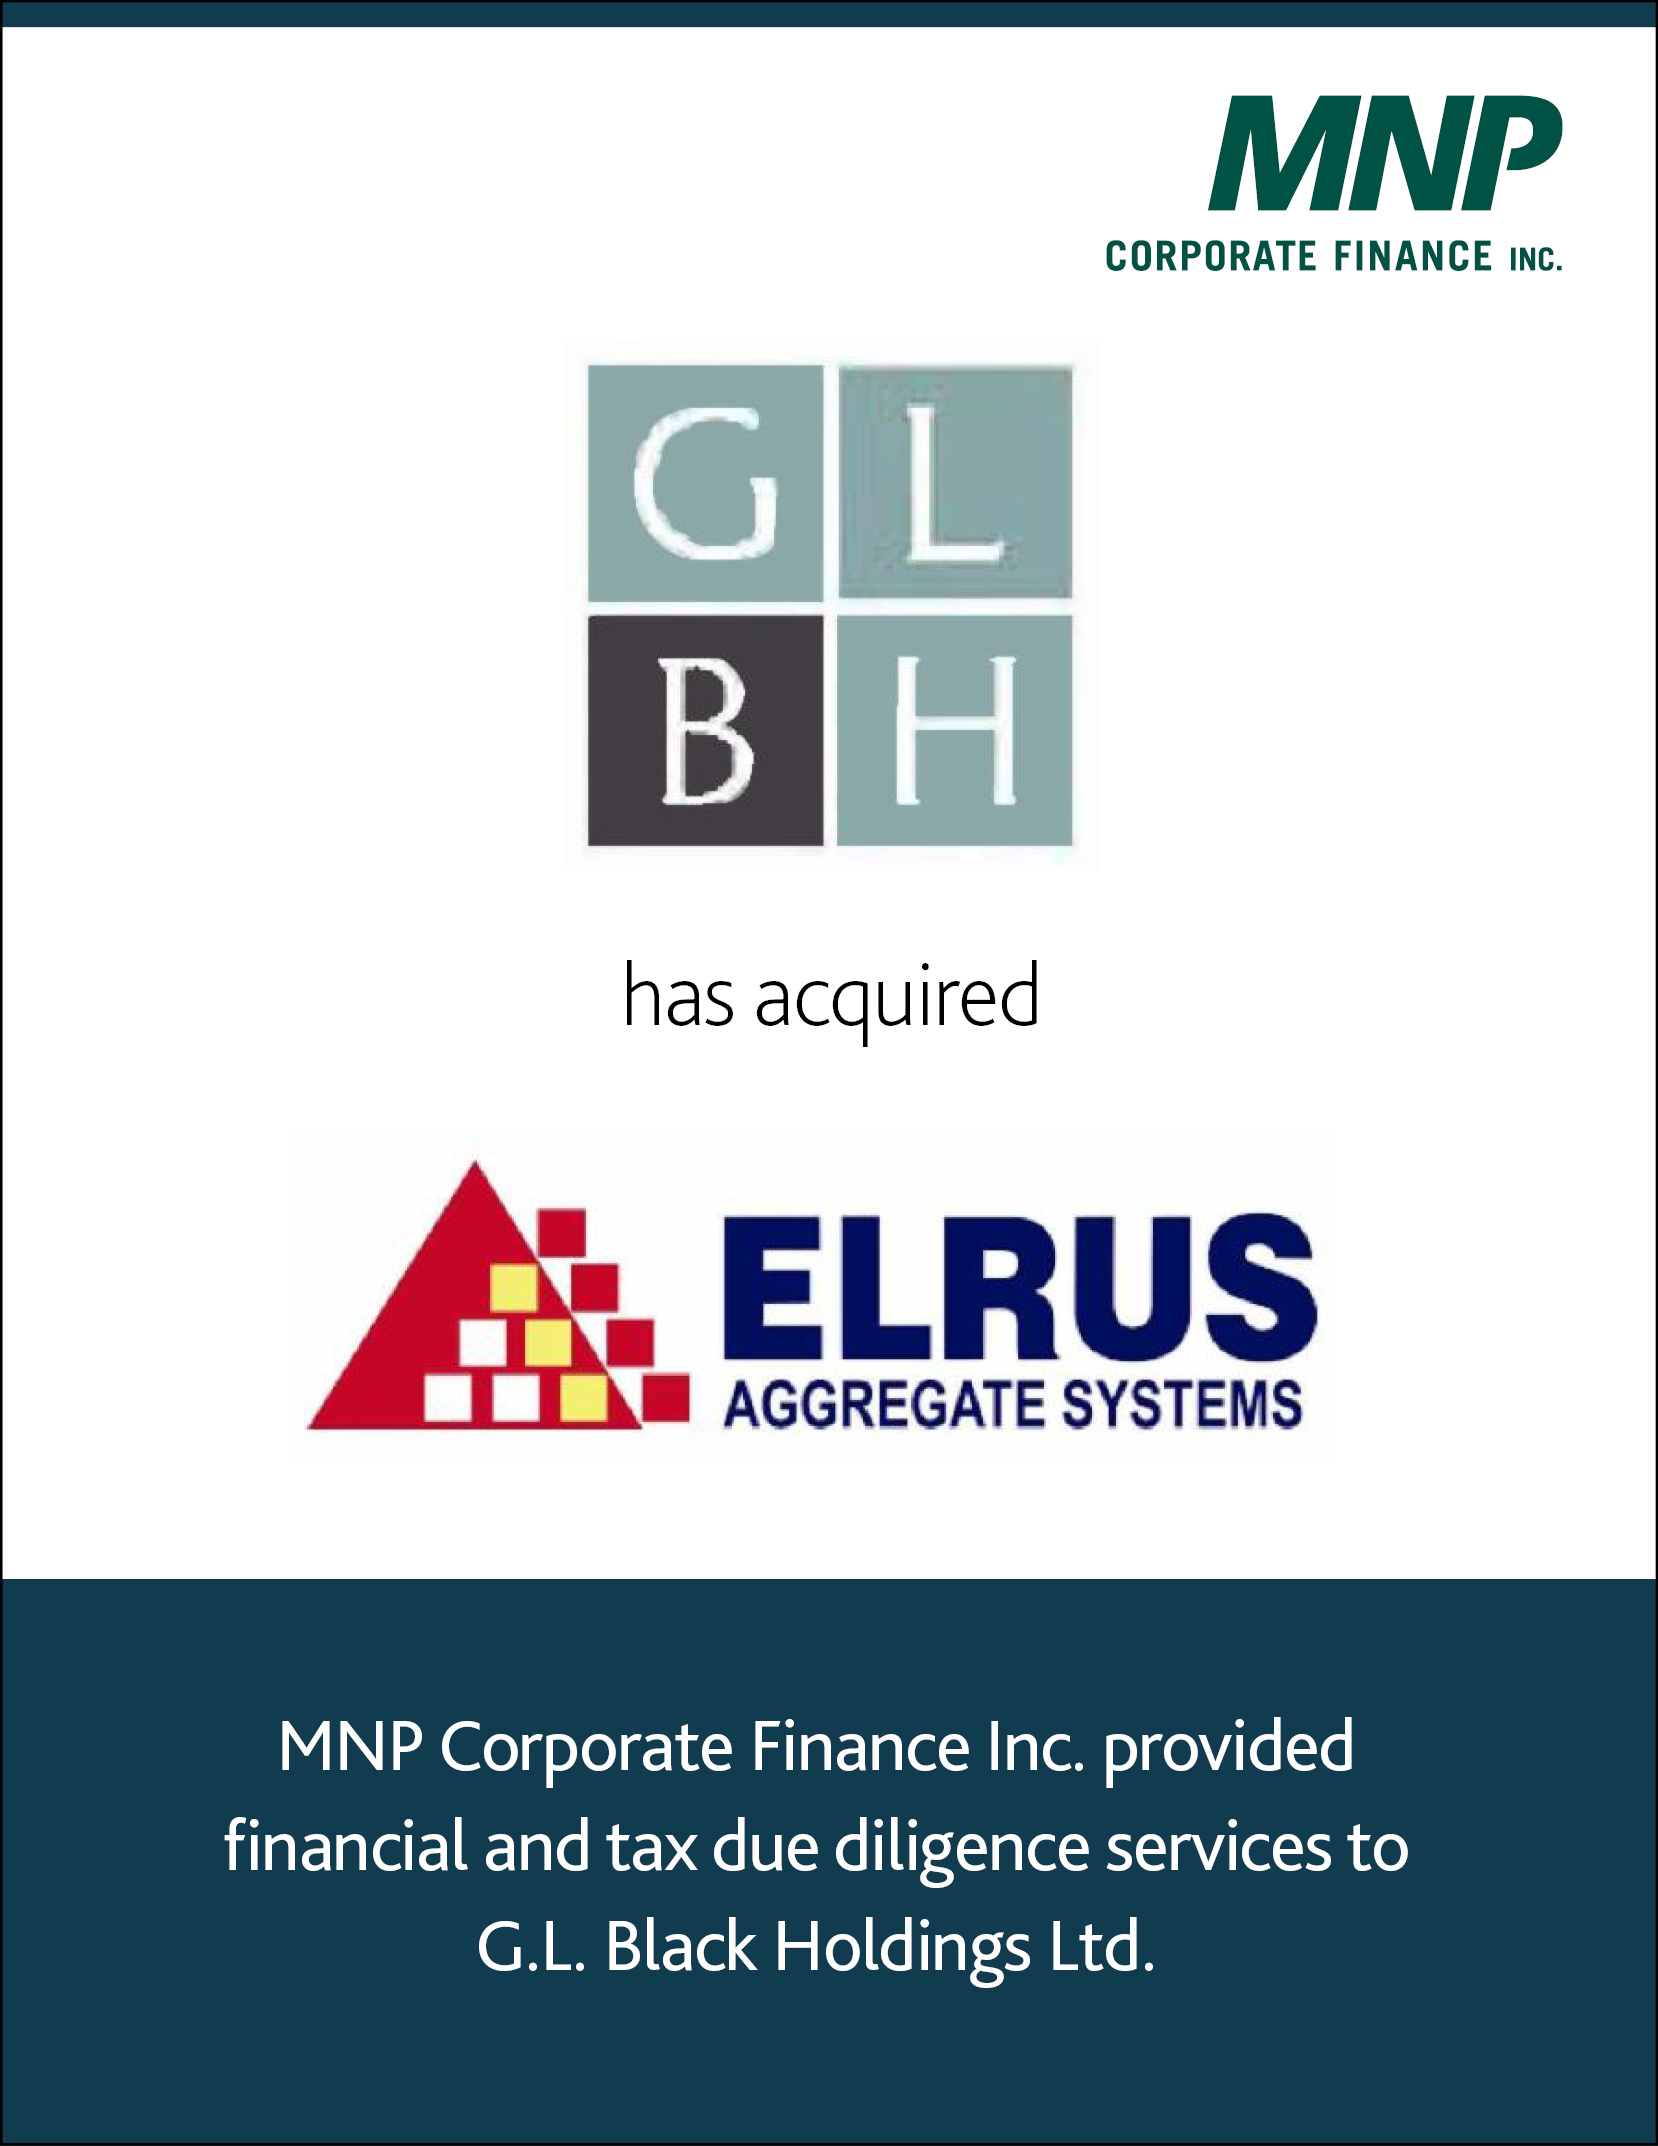 GLBH has acquired Elrus Aggregate Systems